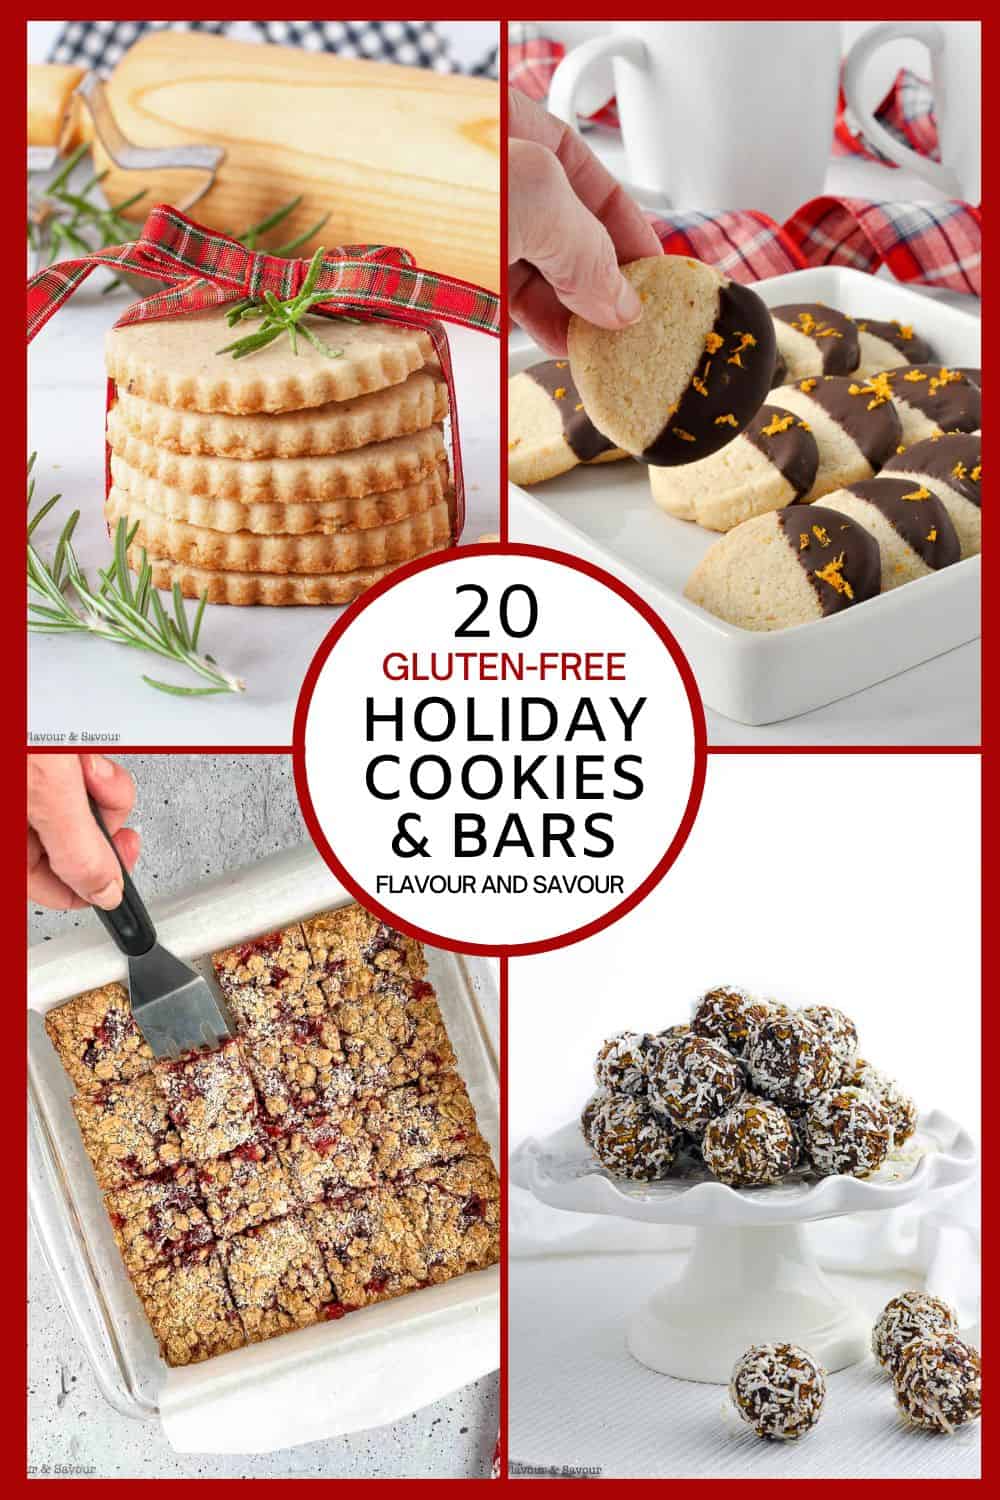 A collage of images of gluten-free holiday cookies and bars.